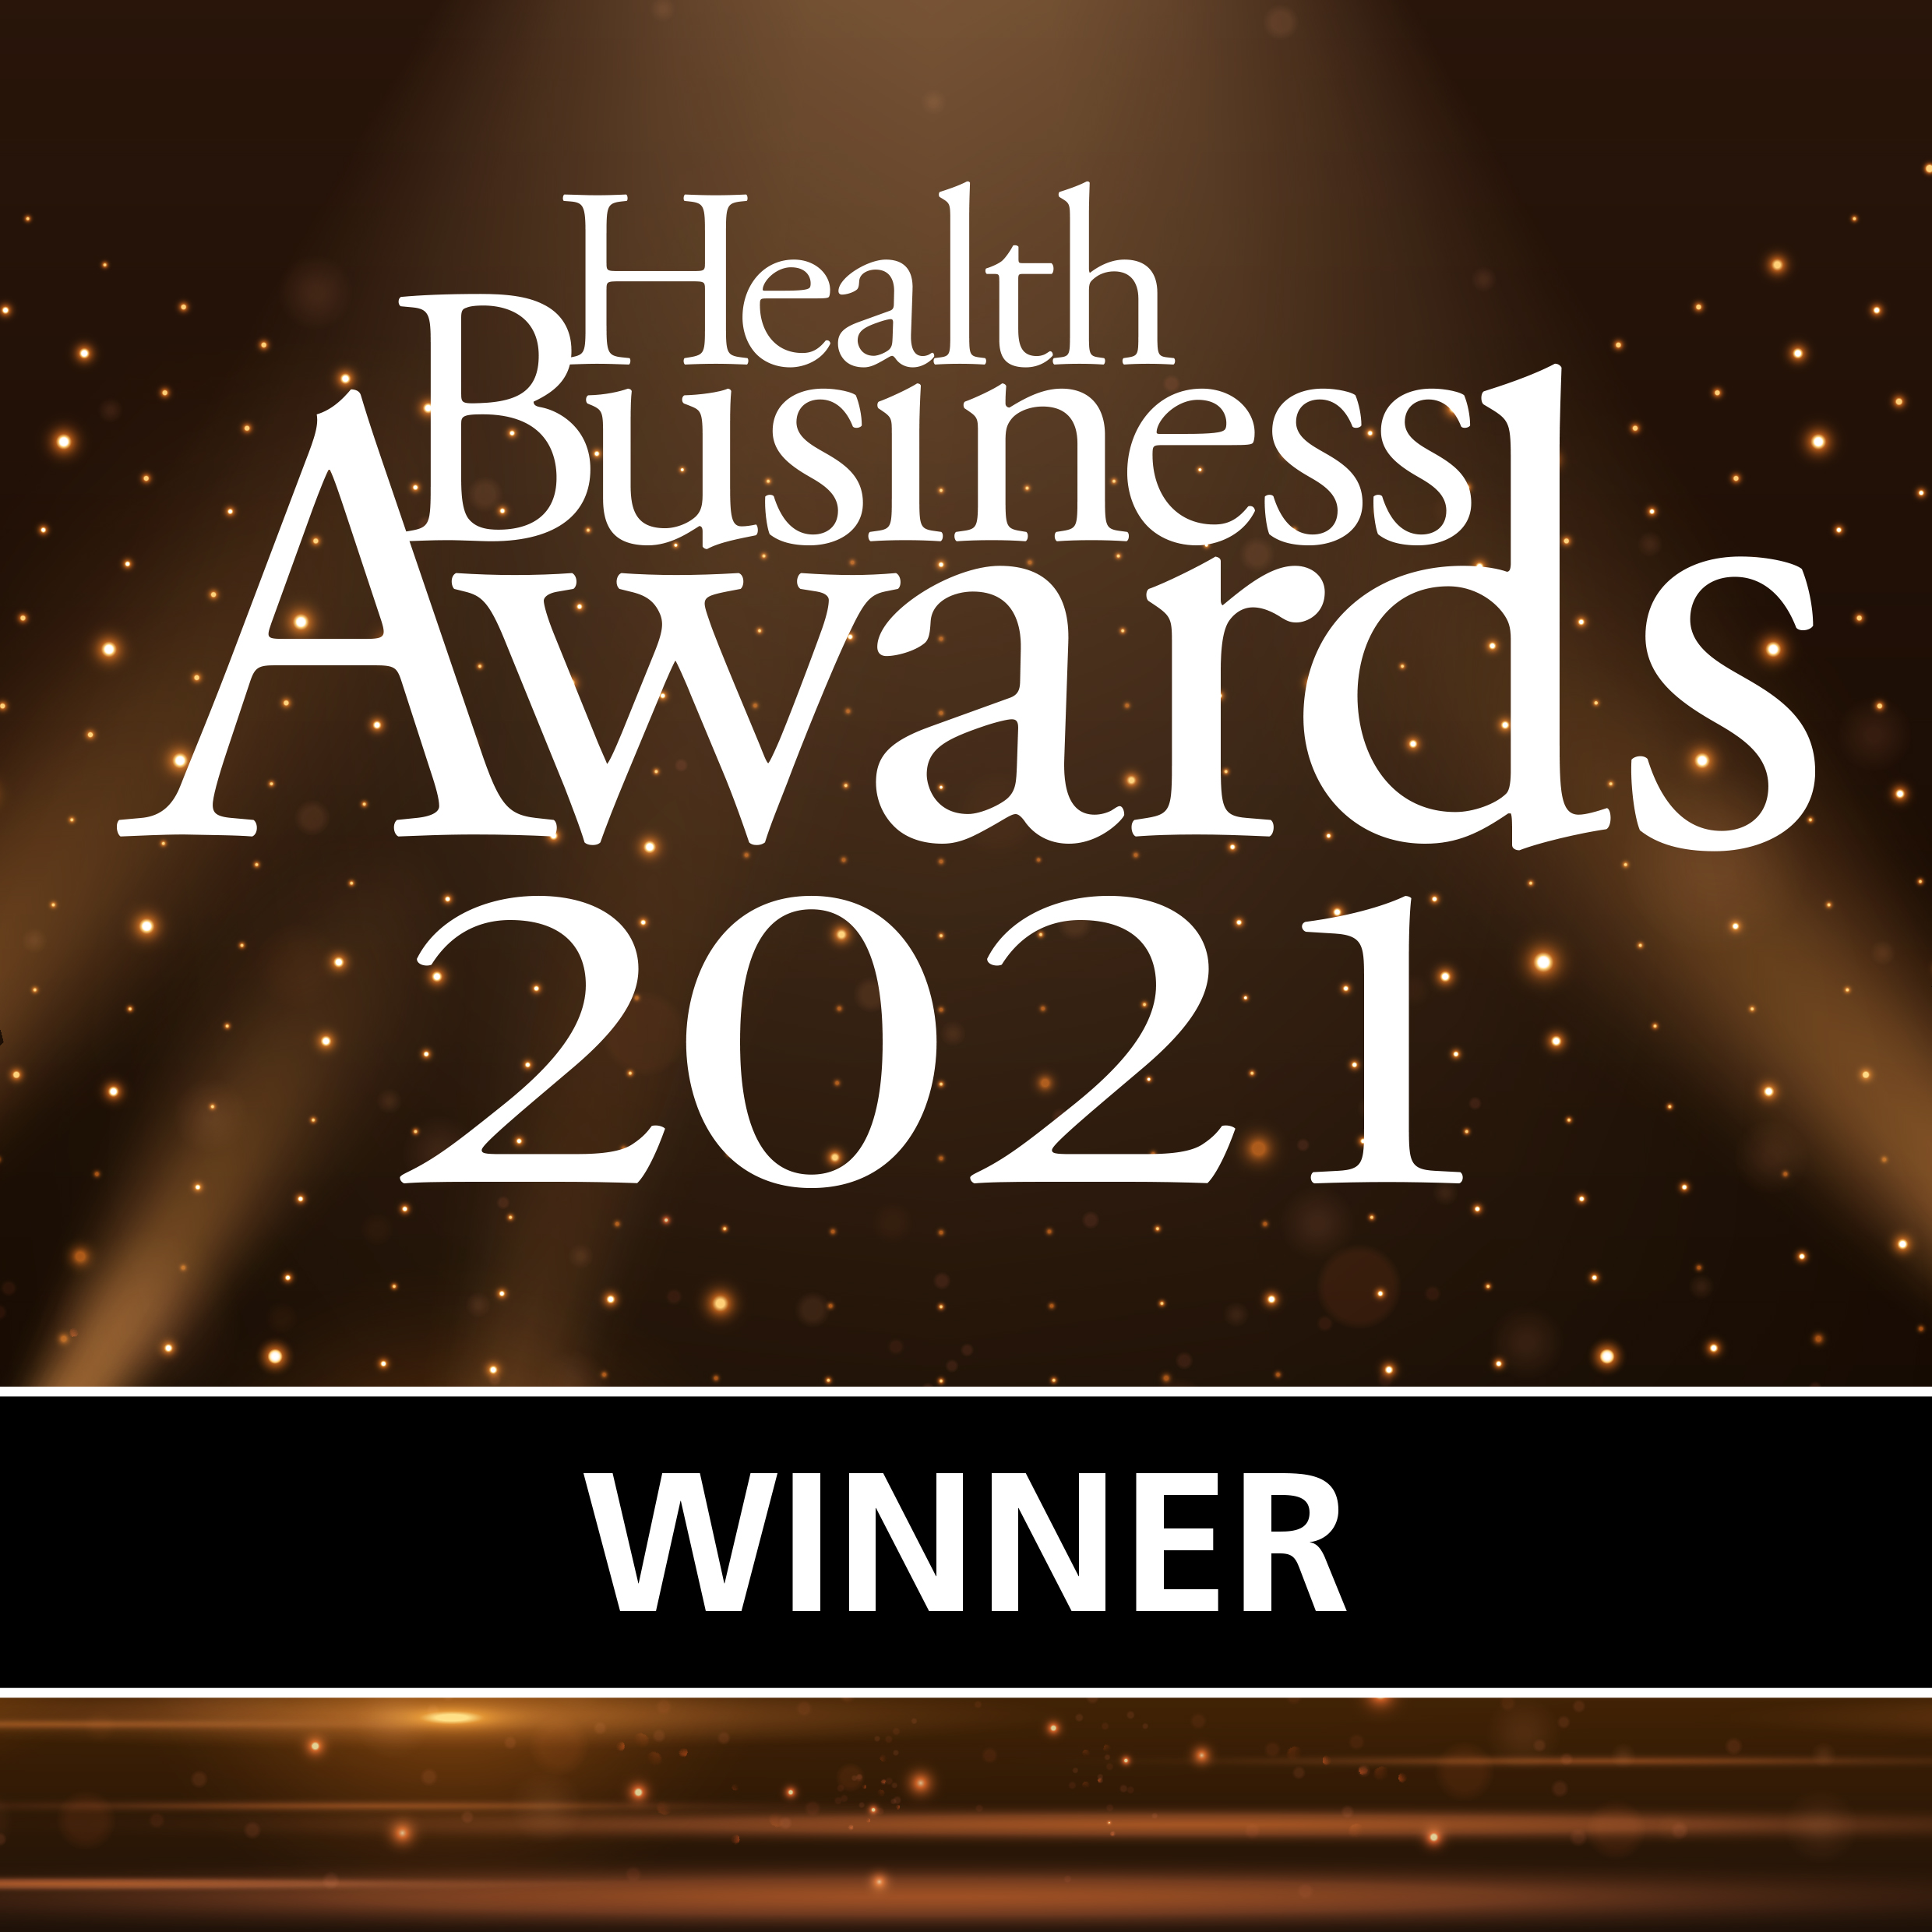 image for the Health Business Awards award